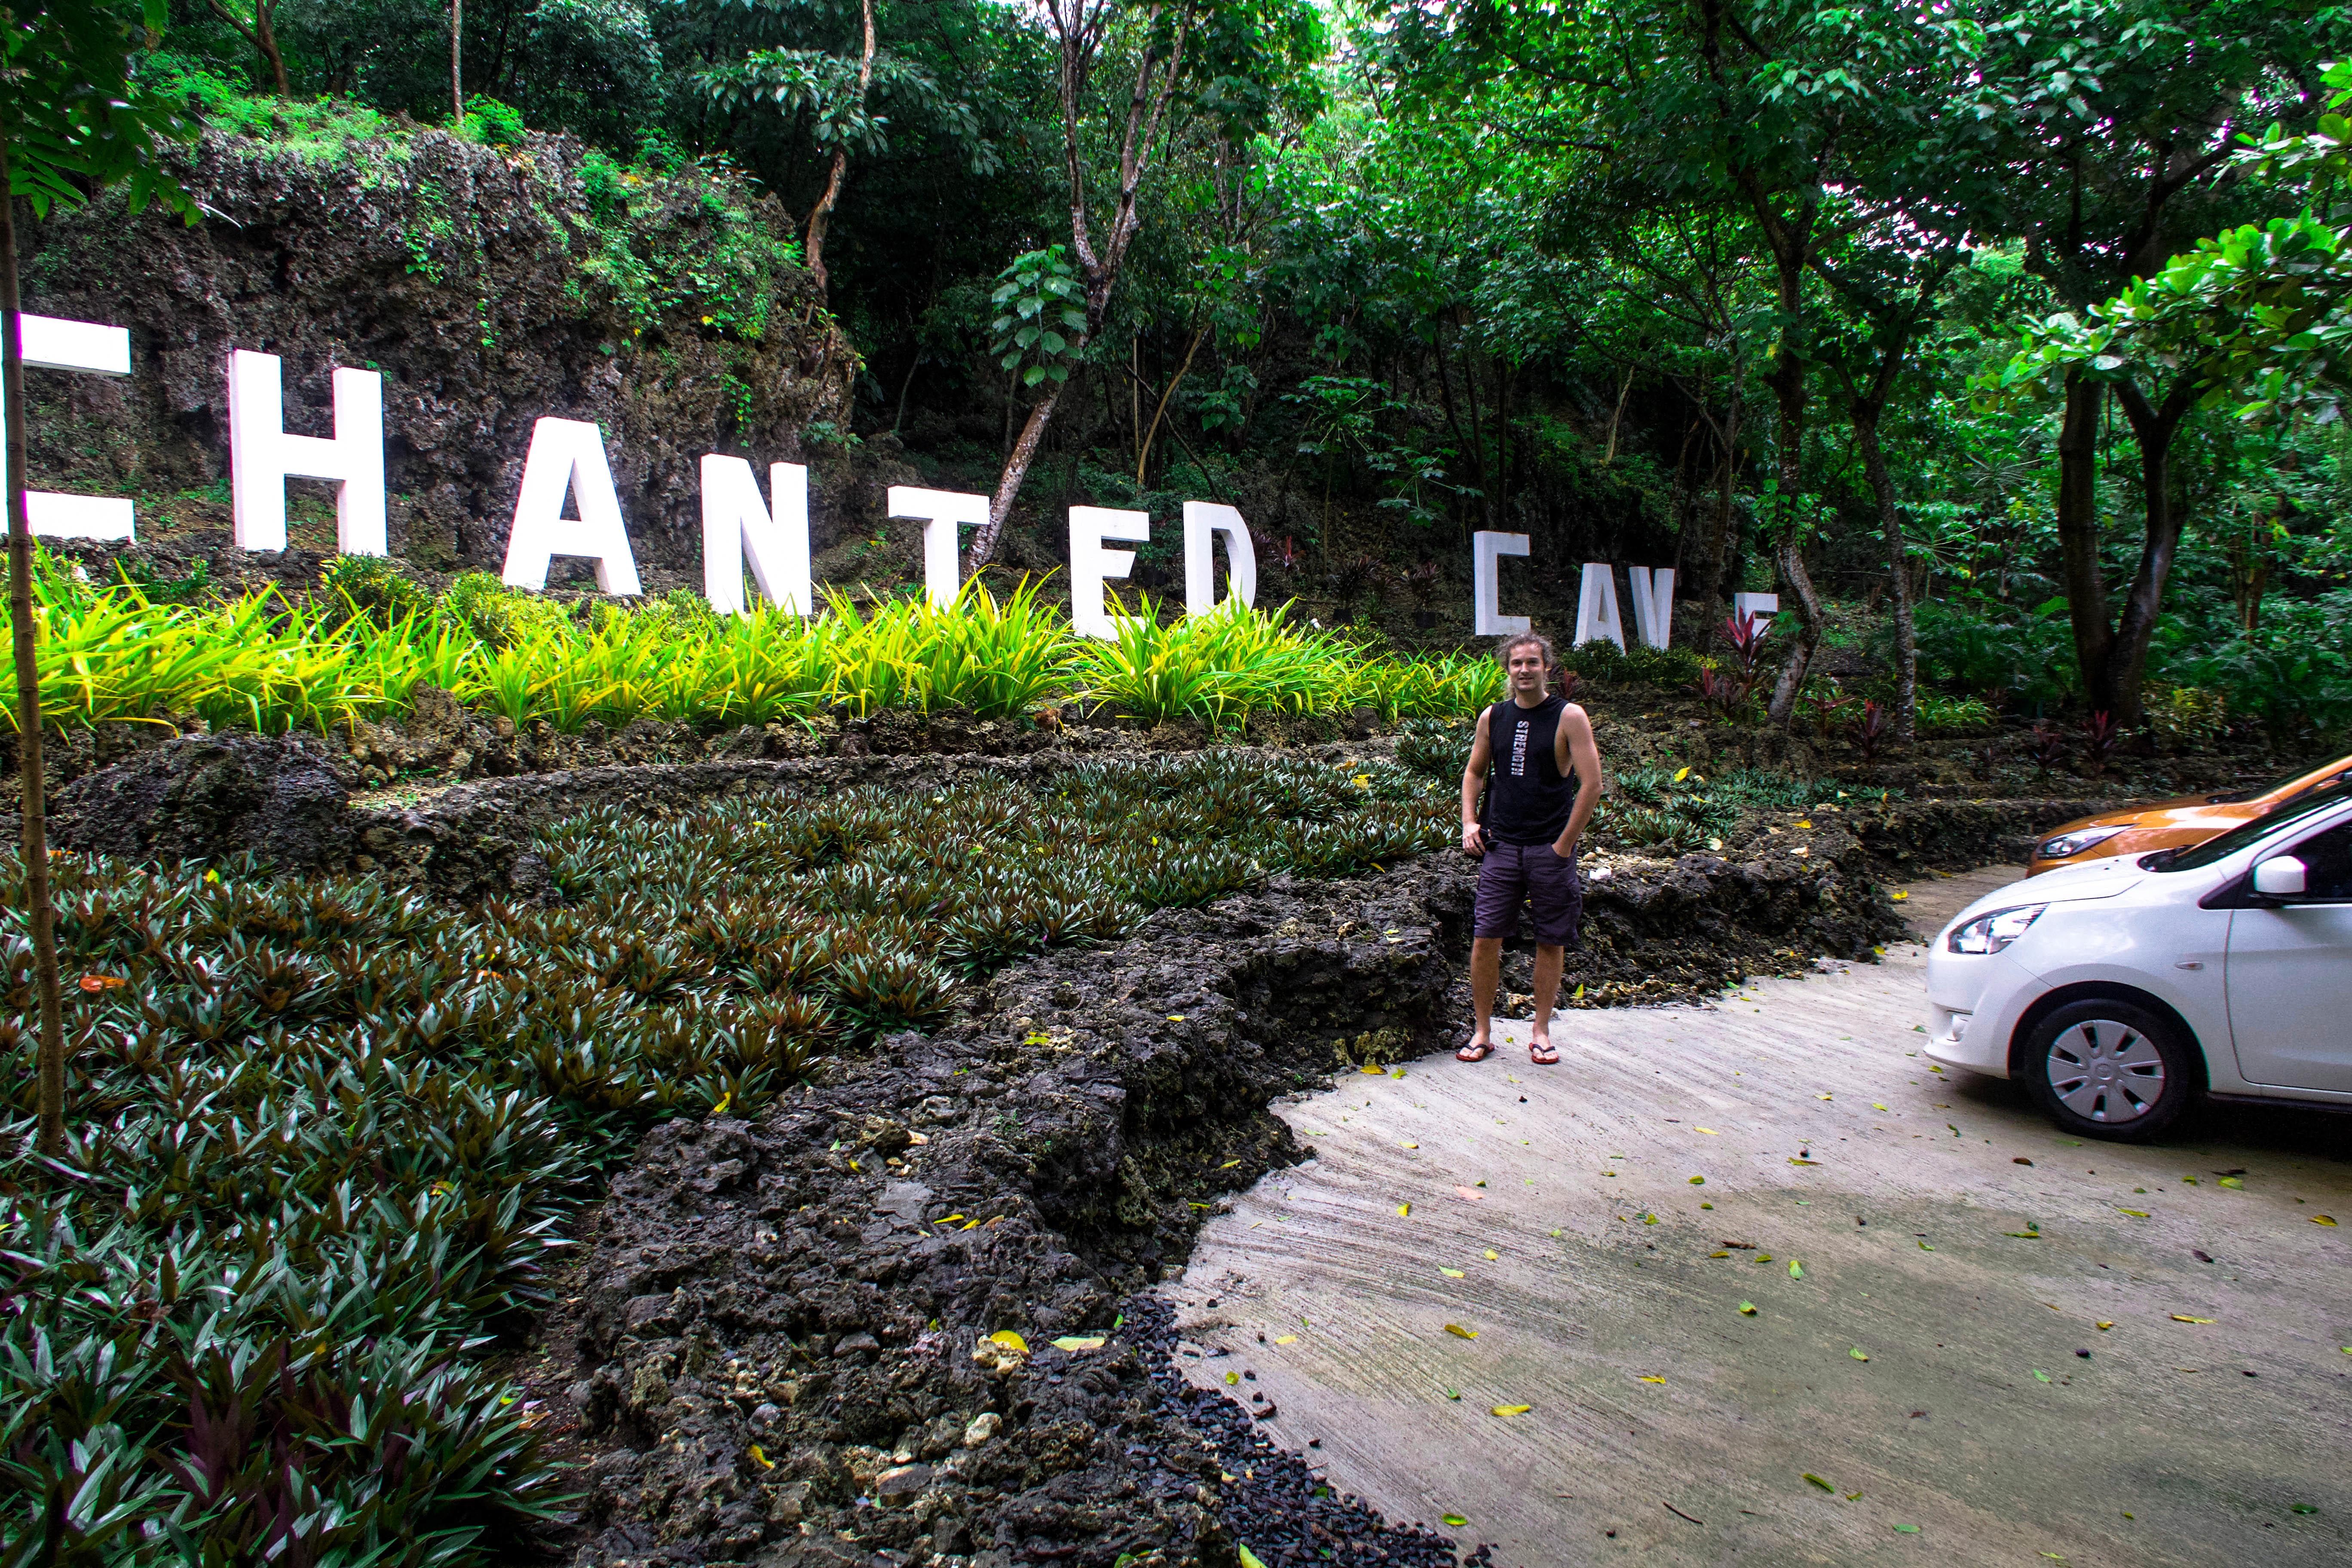 lenny through paradise with big letters of the white sign of enchanted cave bolinao pangasinan philippines